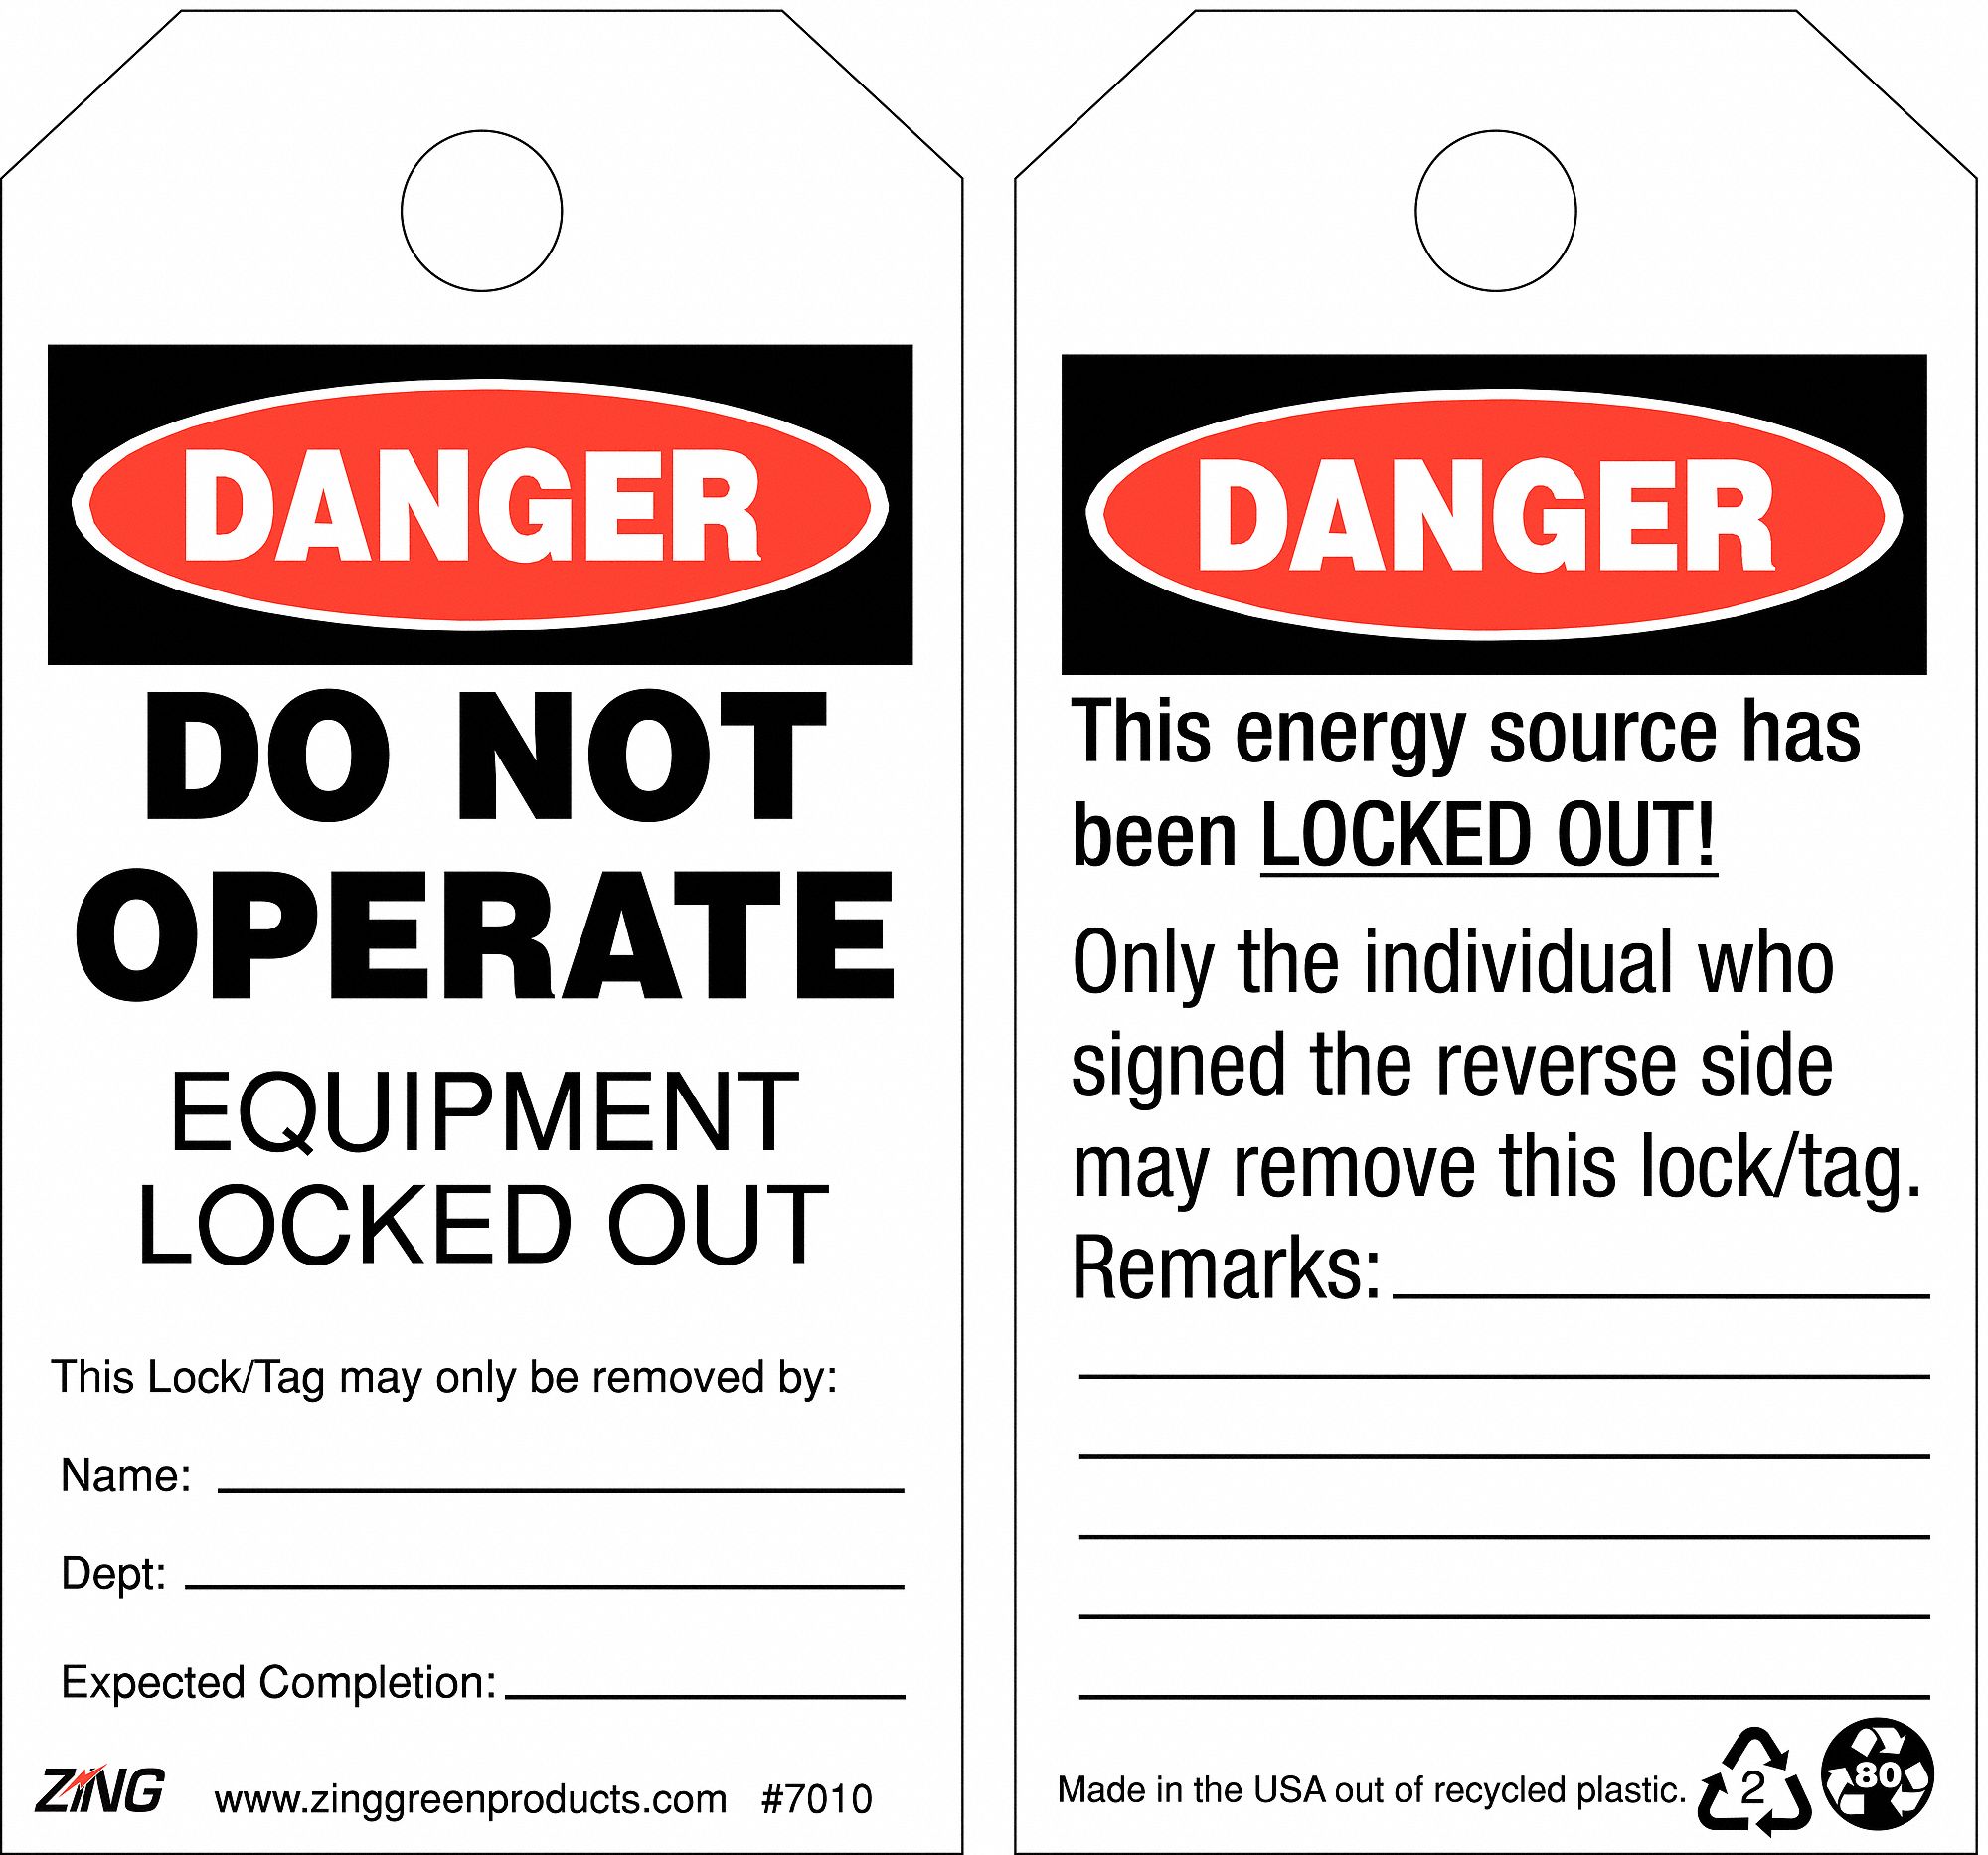 Cylinder Lockout ZING 7101 RecycLockout Lockout Tagout Recycled Plastic Zing Green Products 